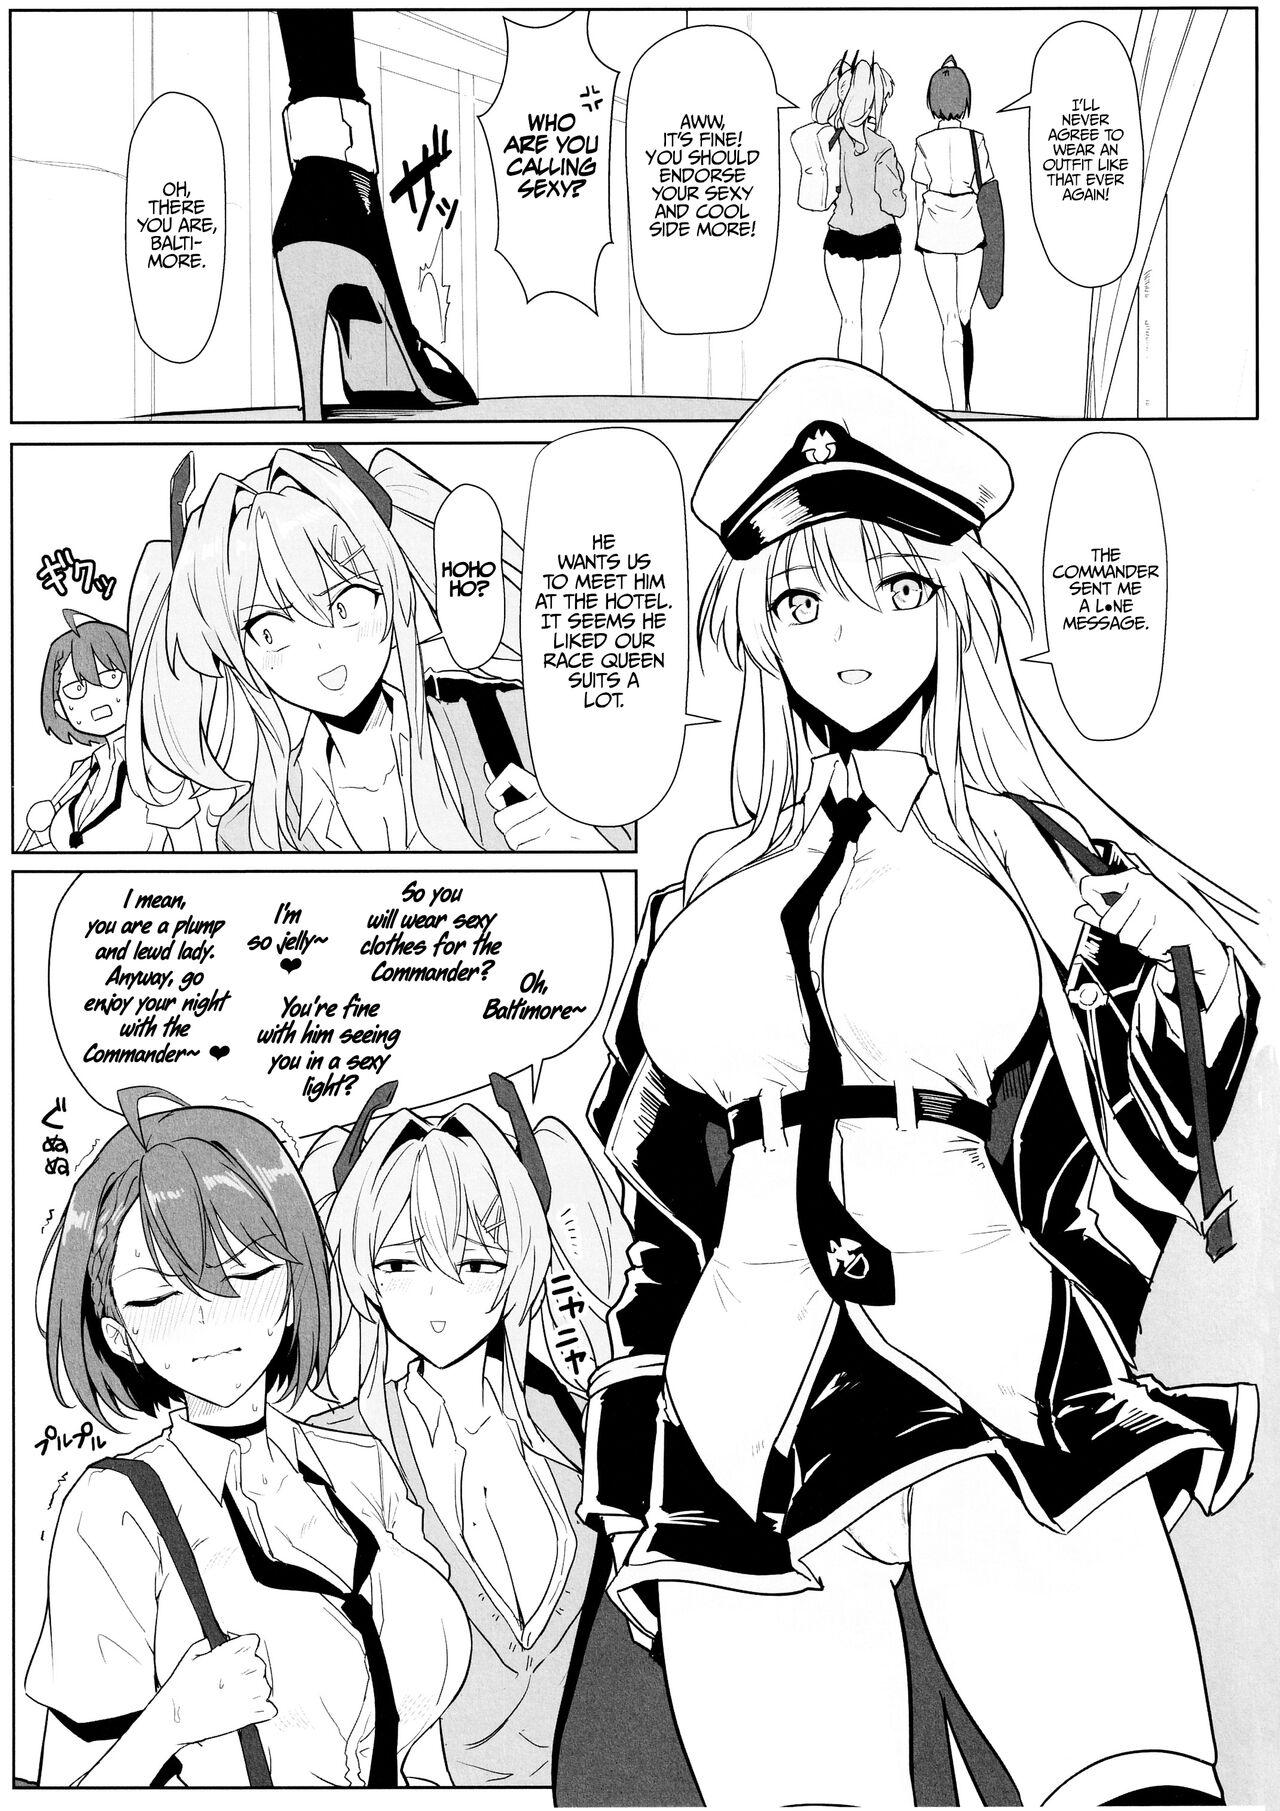 Couple A Book about Race Queens Enterprise and Baltimore being Lewd - Azur lane Breeding - Page 4